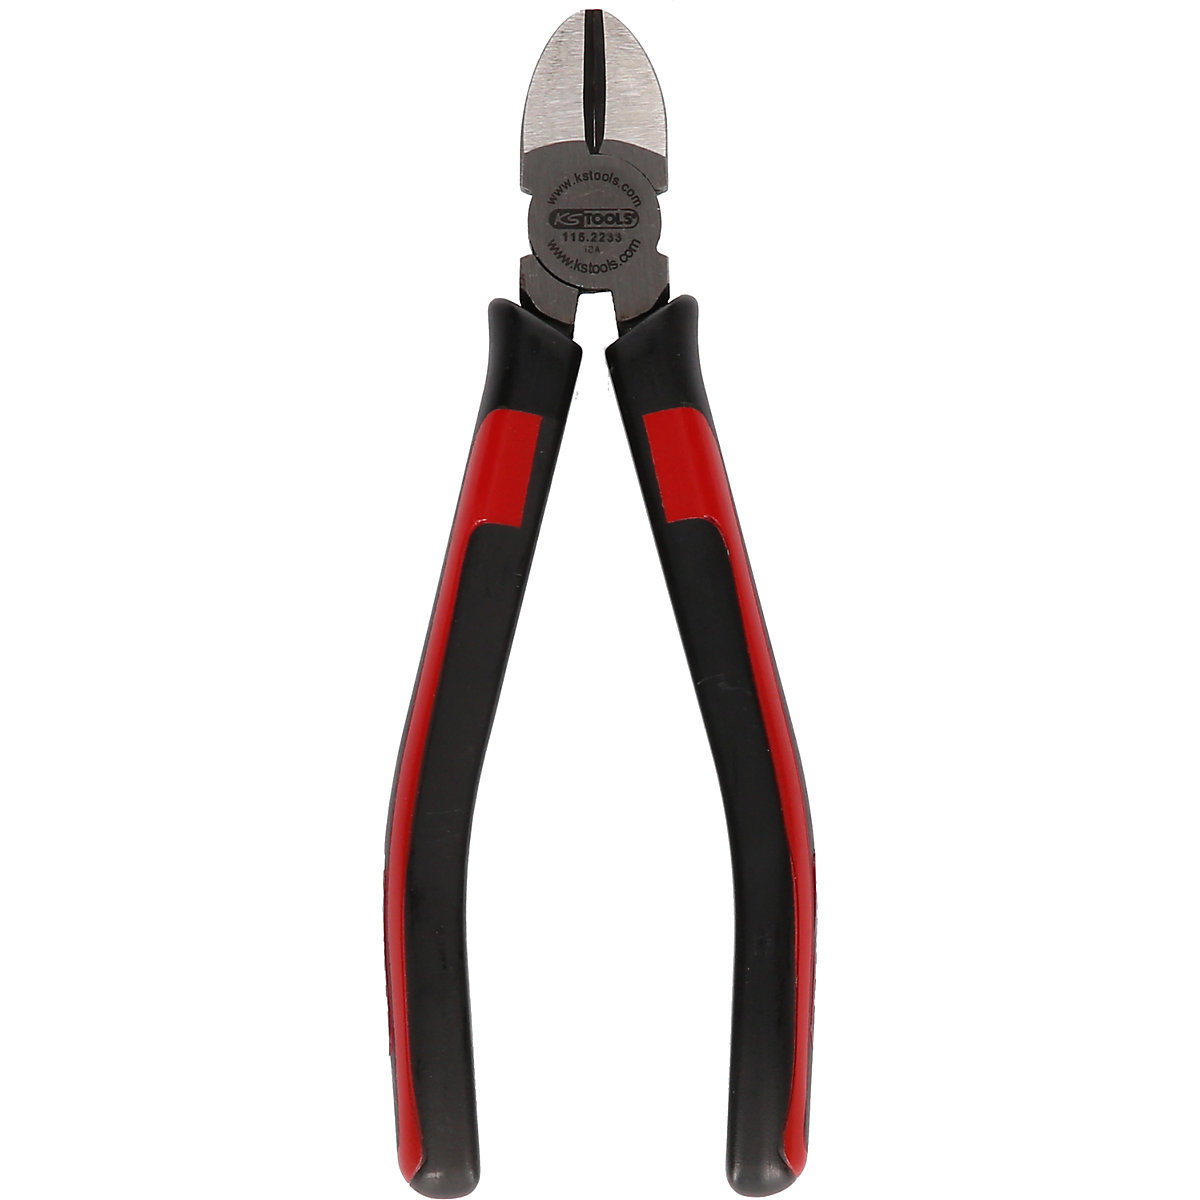 Tronchese a tagliente laterale diagonale SlimPOWER – KS Tools